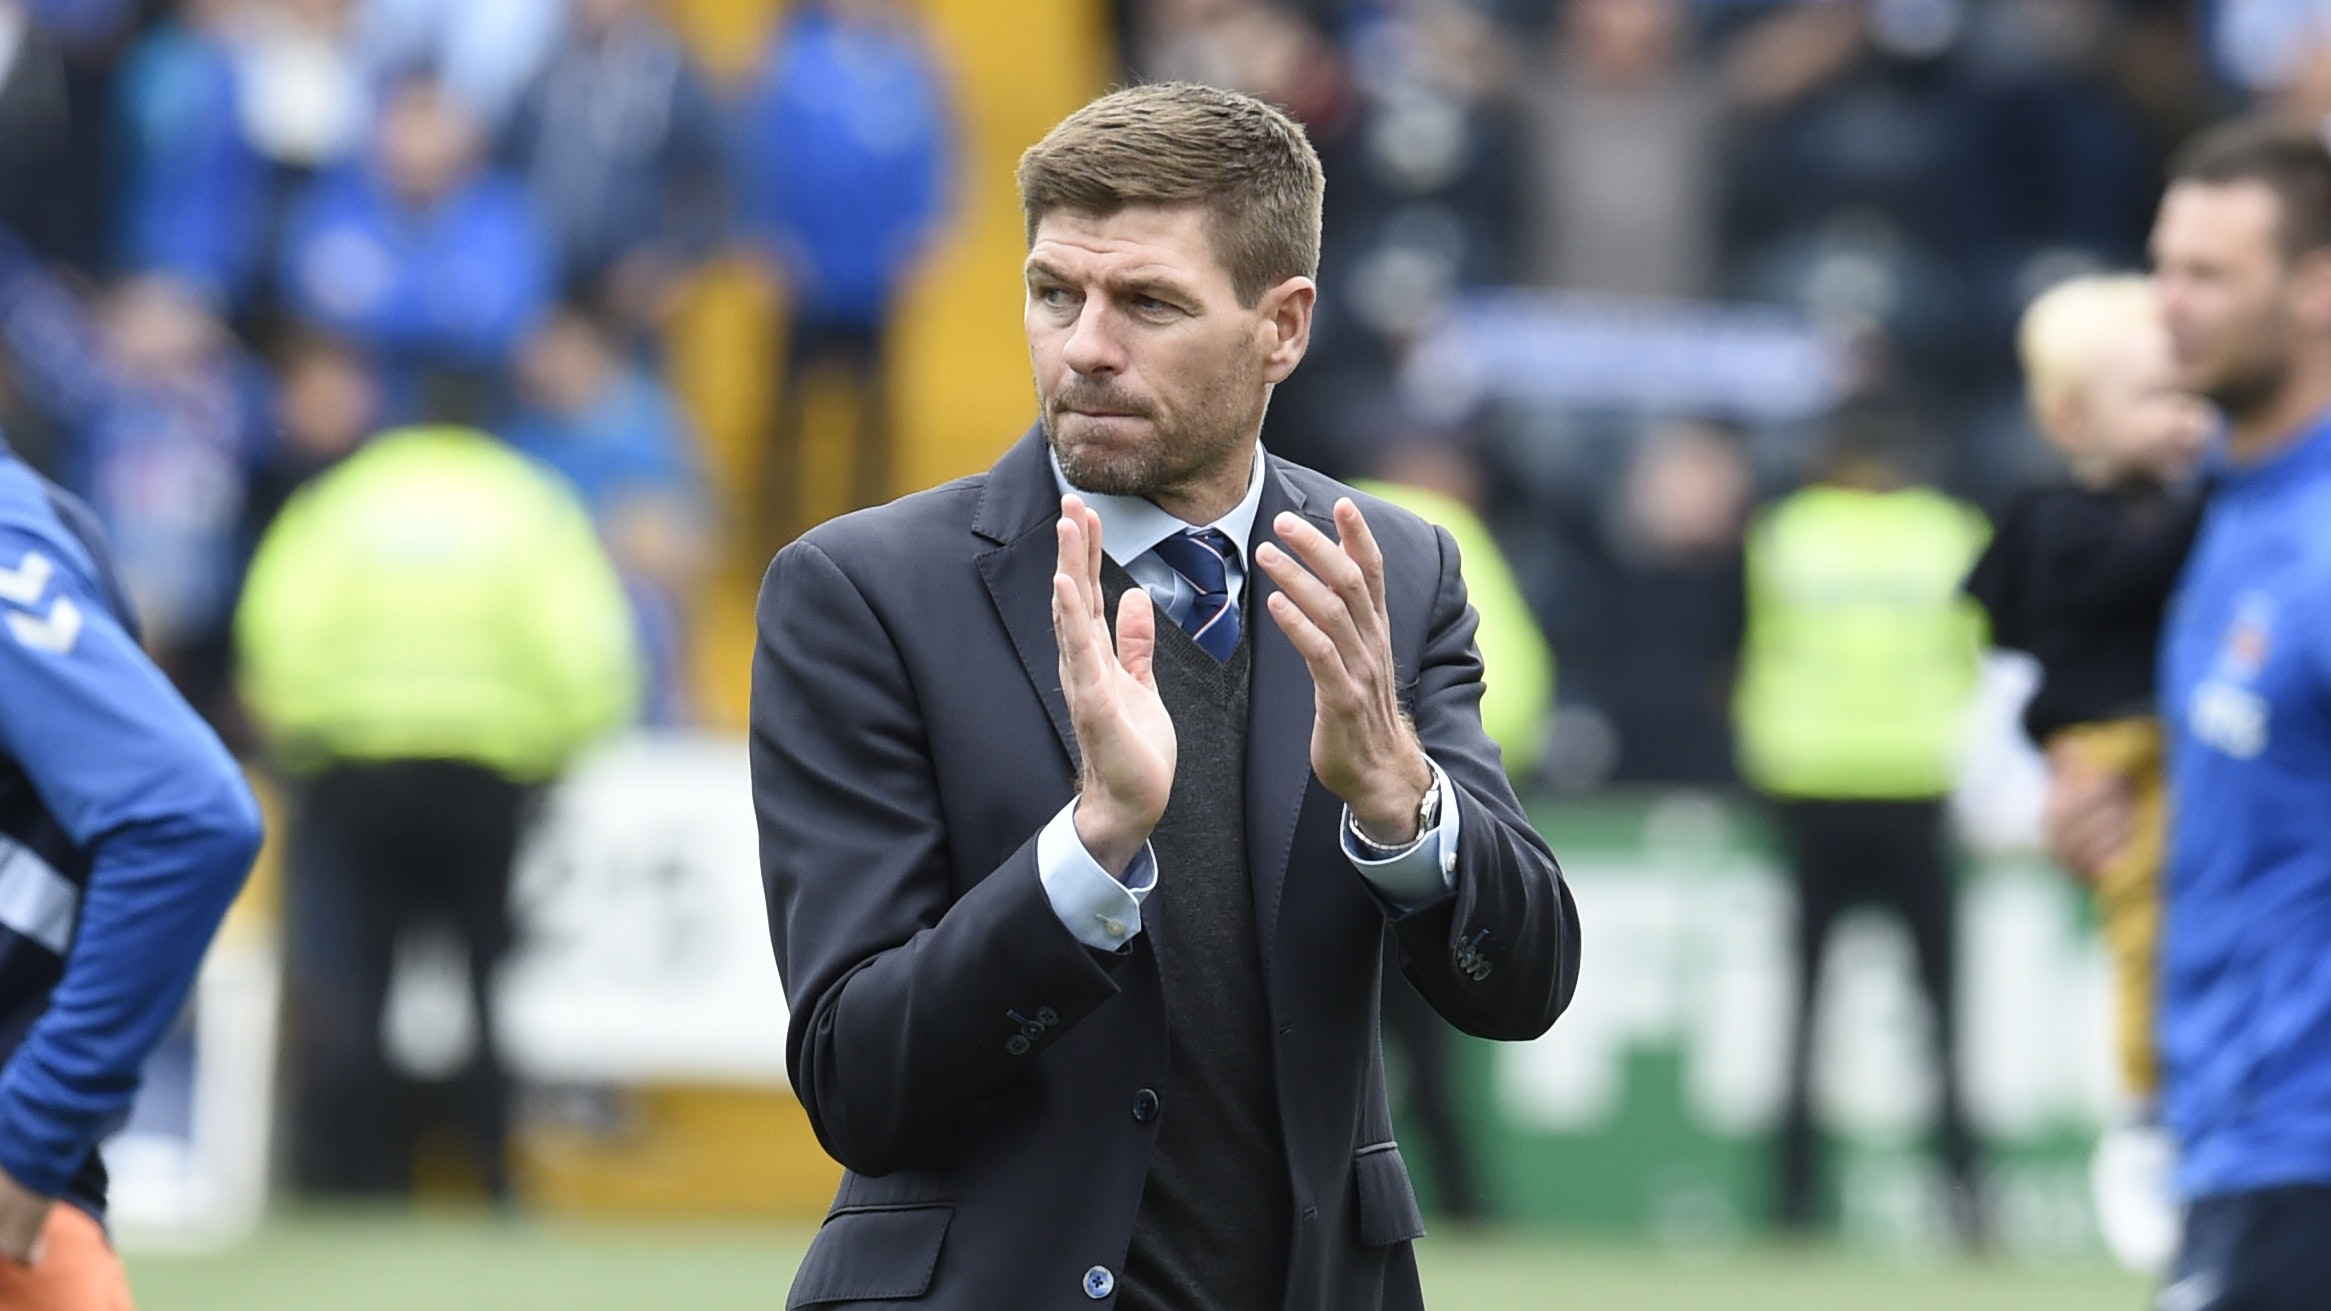 Glasgow Rangers have drawn side for Europa League fixture